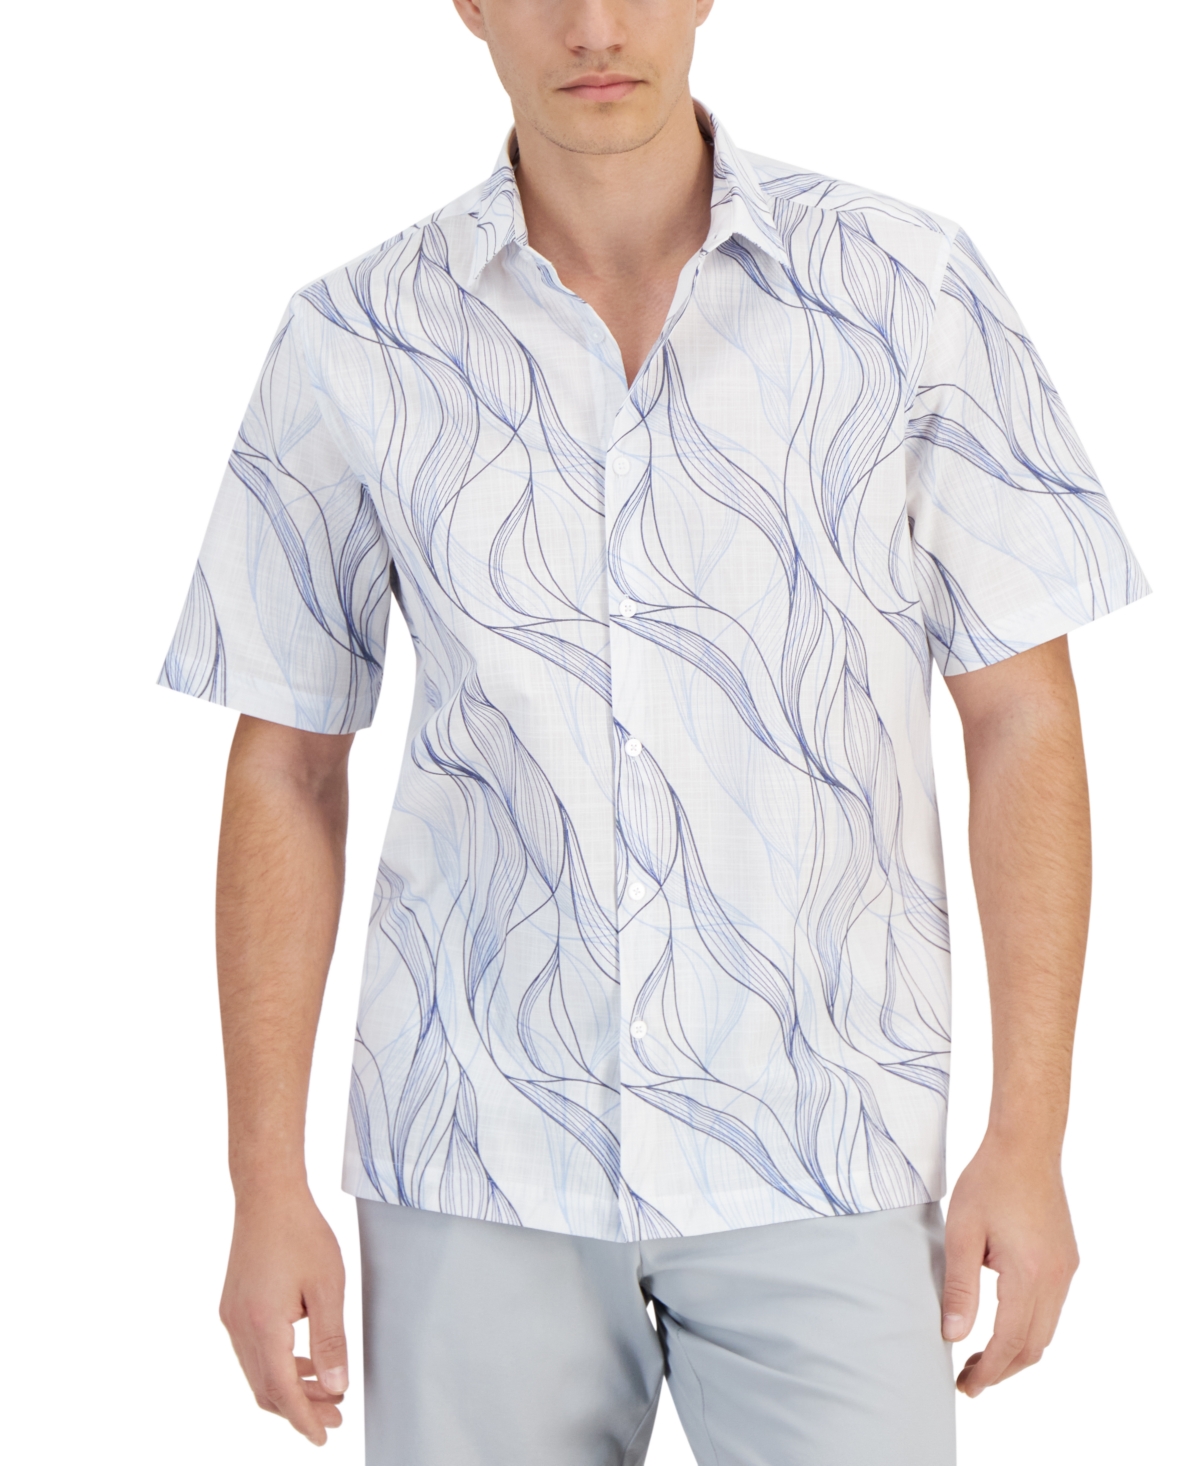 Men's Regular-Fit Abstract Wave-Print Button-Down Shirt, Created for Macy's - Bright White